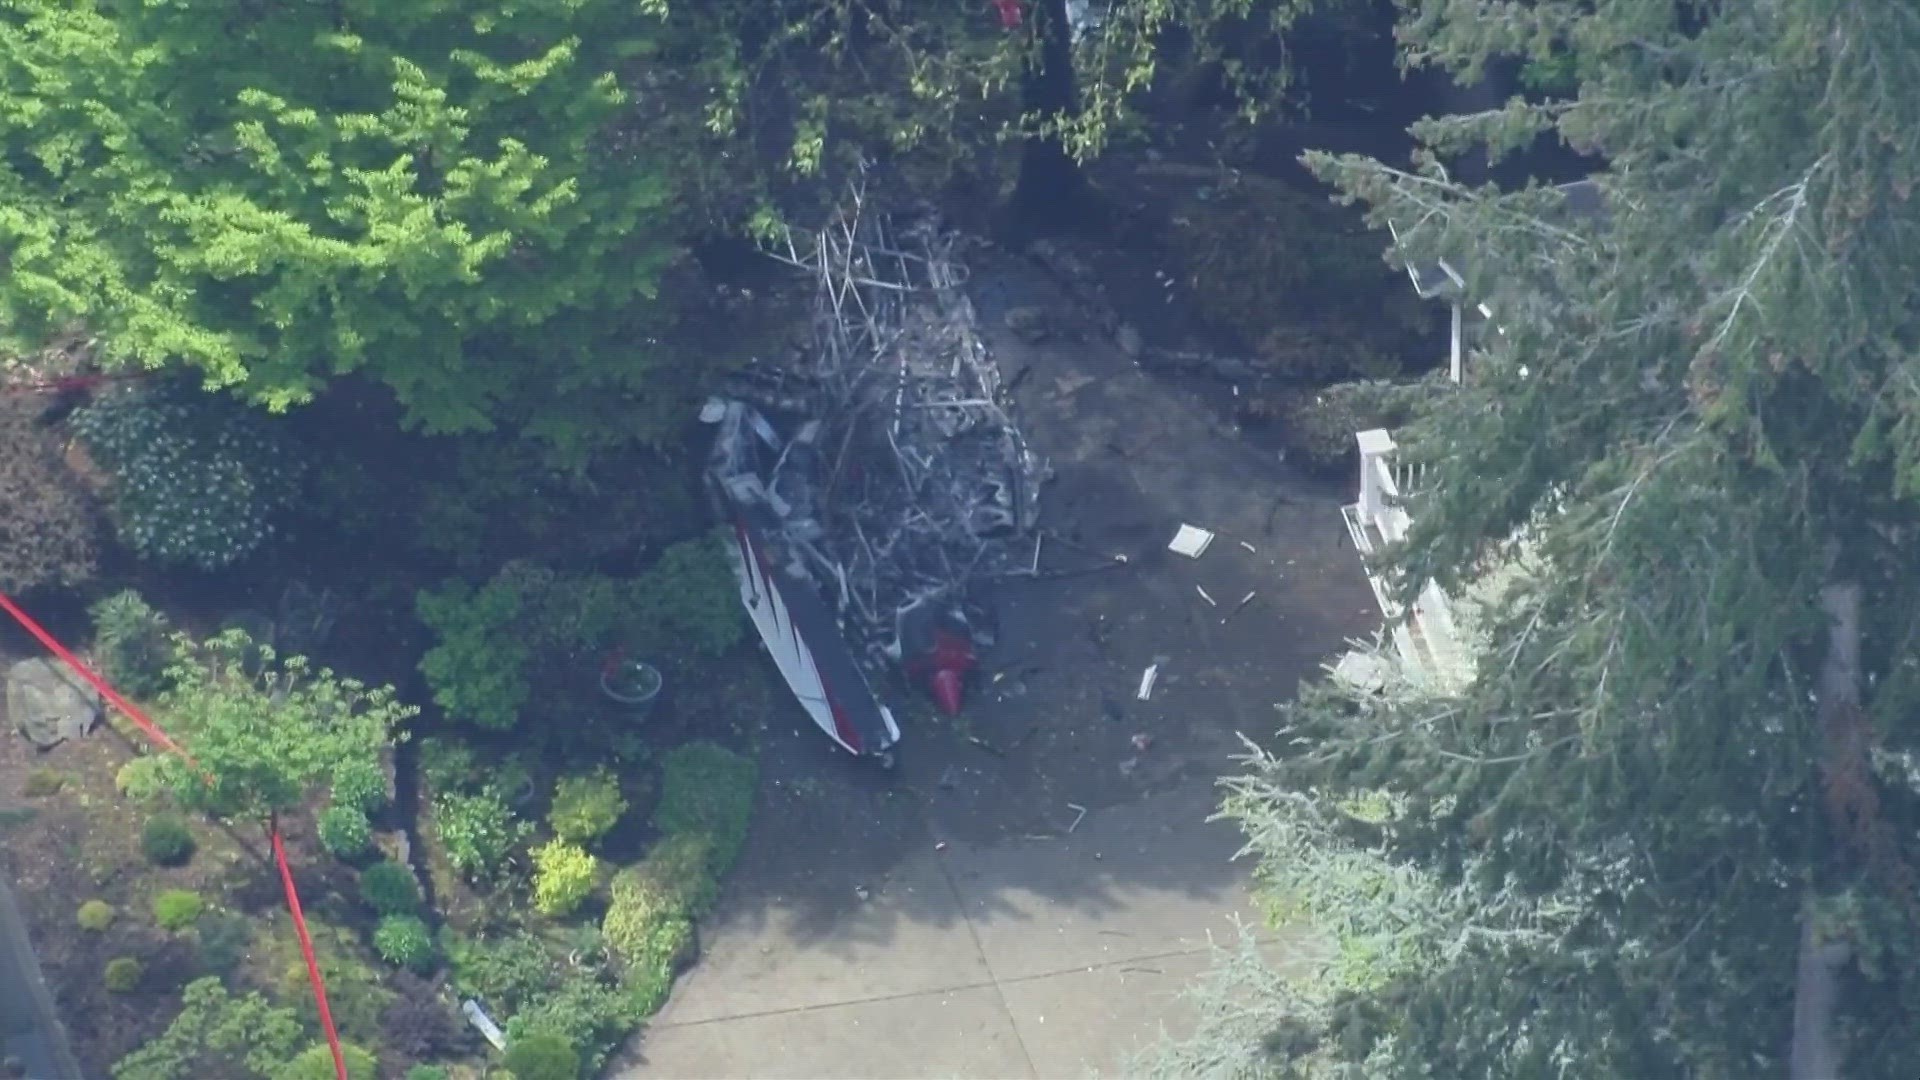 Two people were sent to the hospital after the plane crashed on May 9.